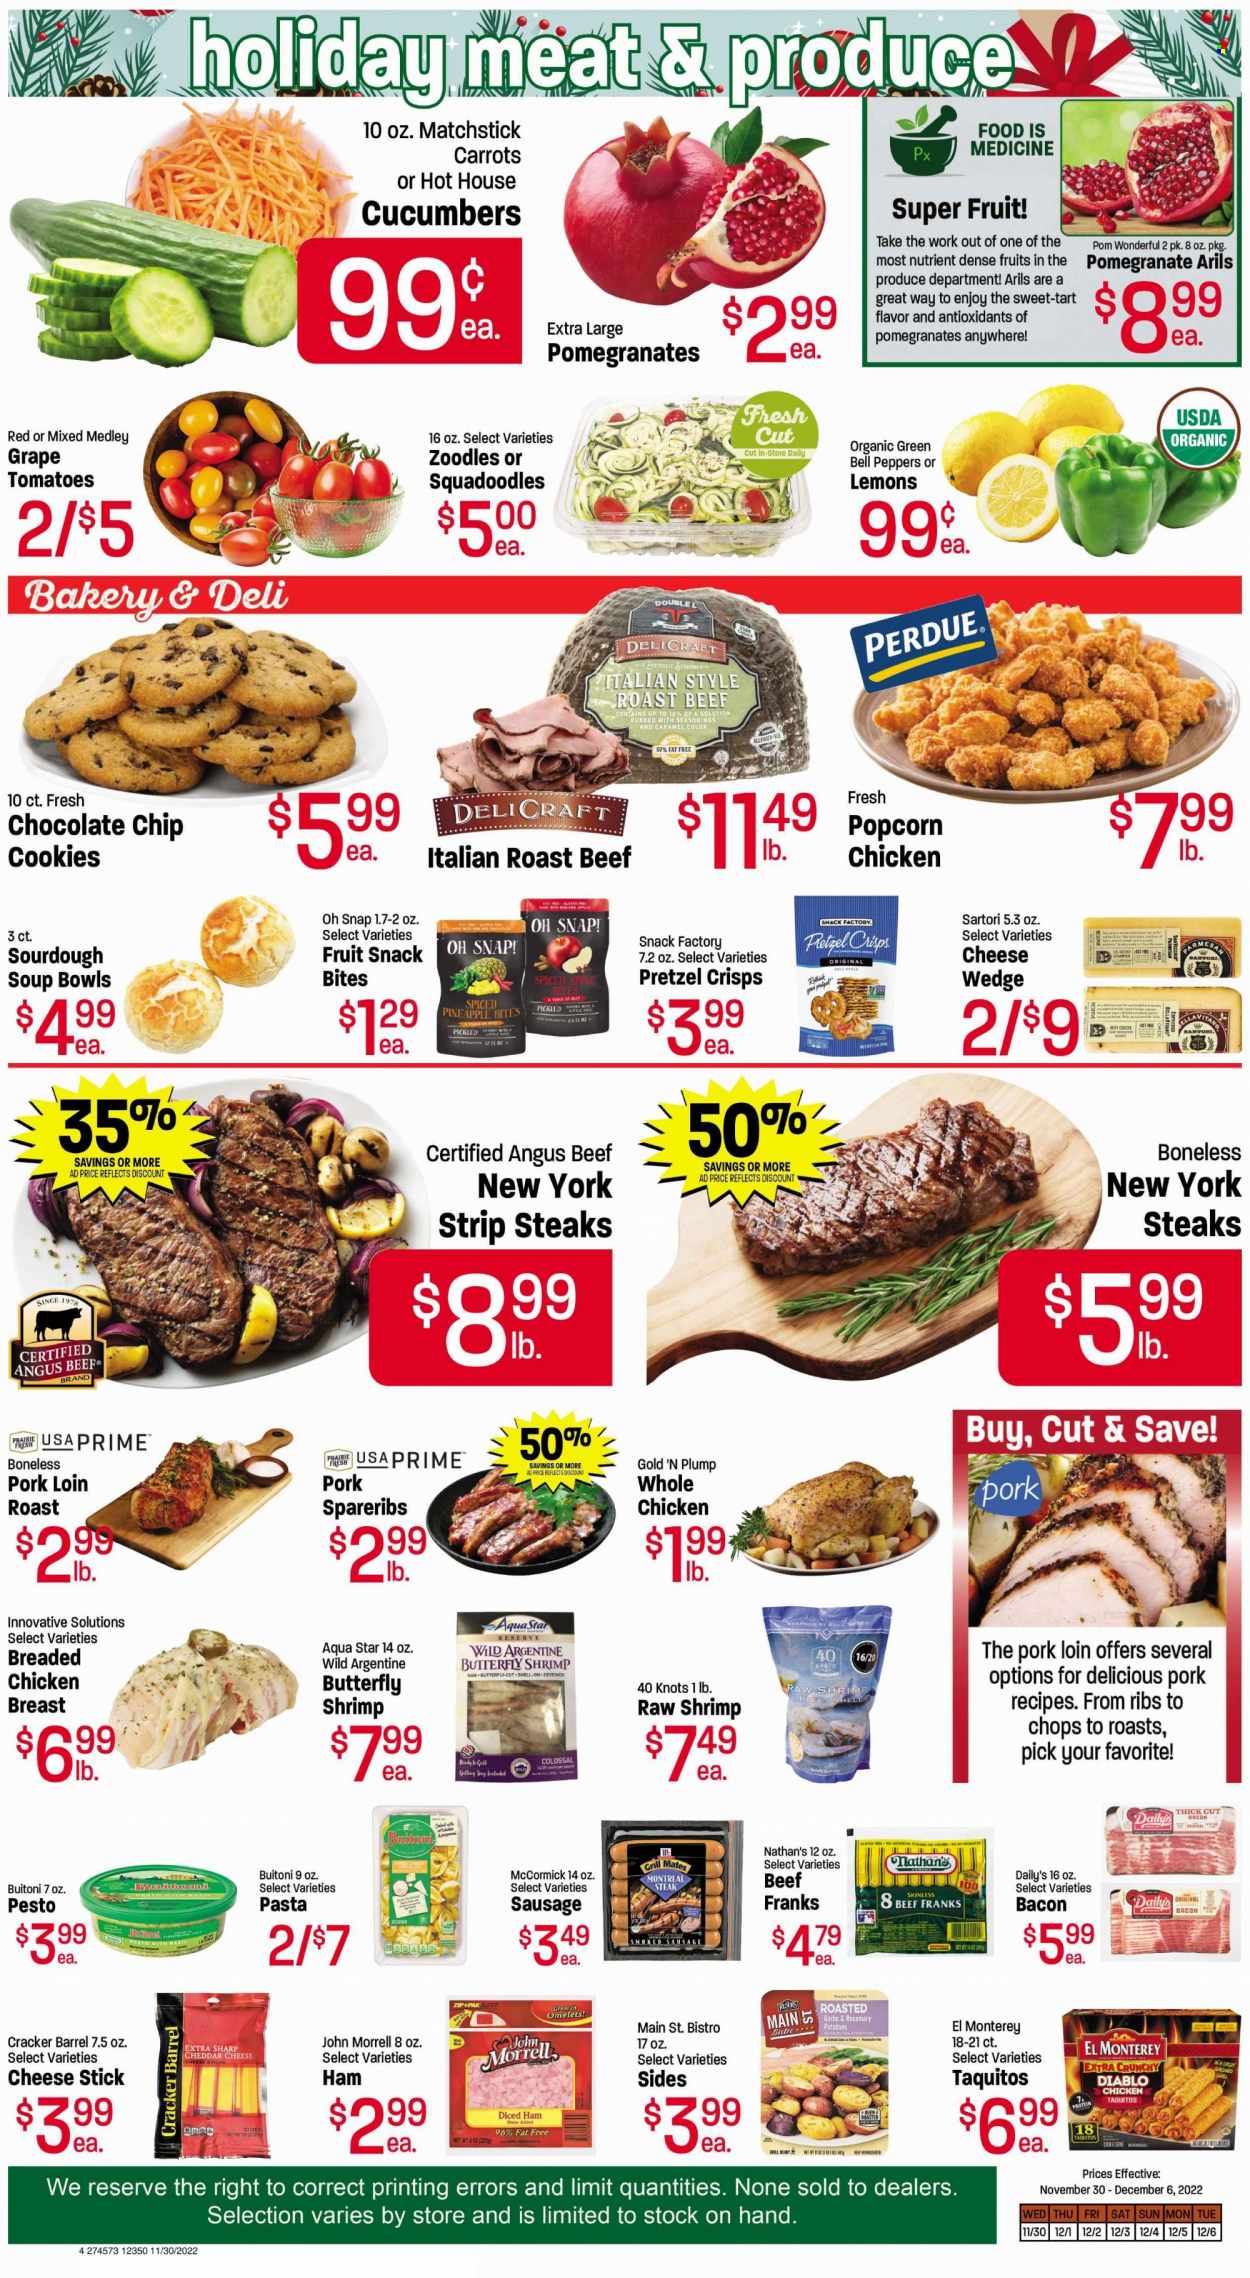 thumbnail - Fresh Market Flyer - 11/30/2022 - 12/06/2022 - Sales products - tart, bell peppers, carrots, tomatoes, potatoes, peppers, pineapple, seafood, shrimps, soup, pasta, fried chicken, Perdue®, taquitos, Buitoni, bacon, ham, sausage, smoked sausage, cheddar, parmesan, cheese, cookies, snack, crackers, fruit snack, popcorn, pretzel crisps, pesto, whole chicken, beef meat, steak, roast beef, striploin steak, pork loin, pork meat, pork spare ribs, grill, pomegranate, lemons. Page 4.